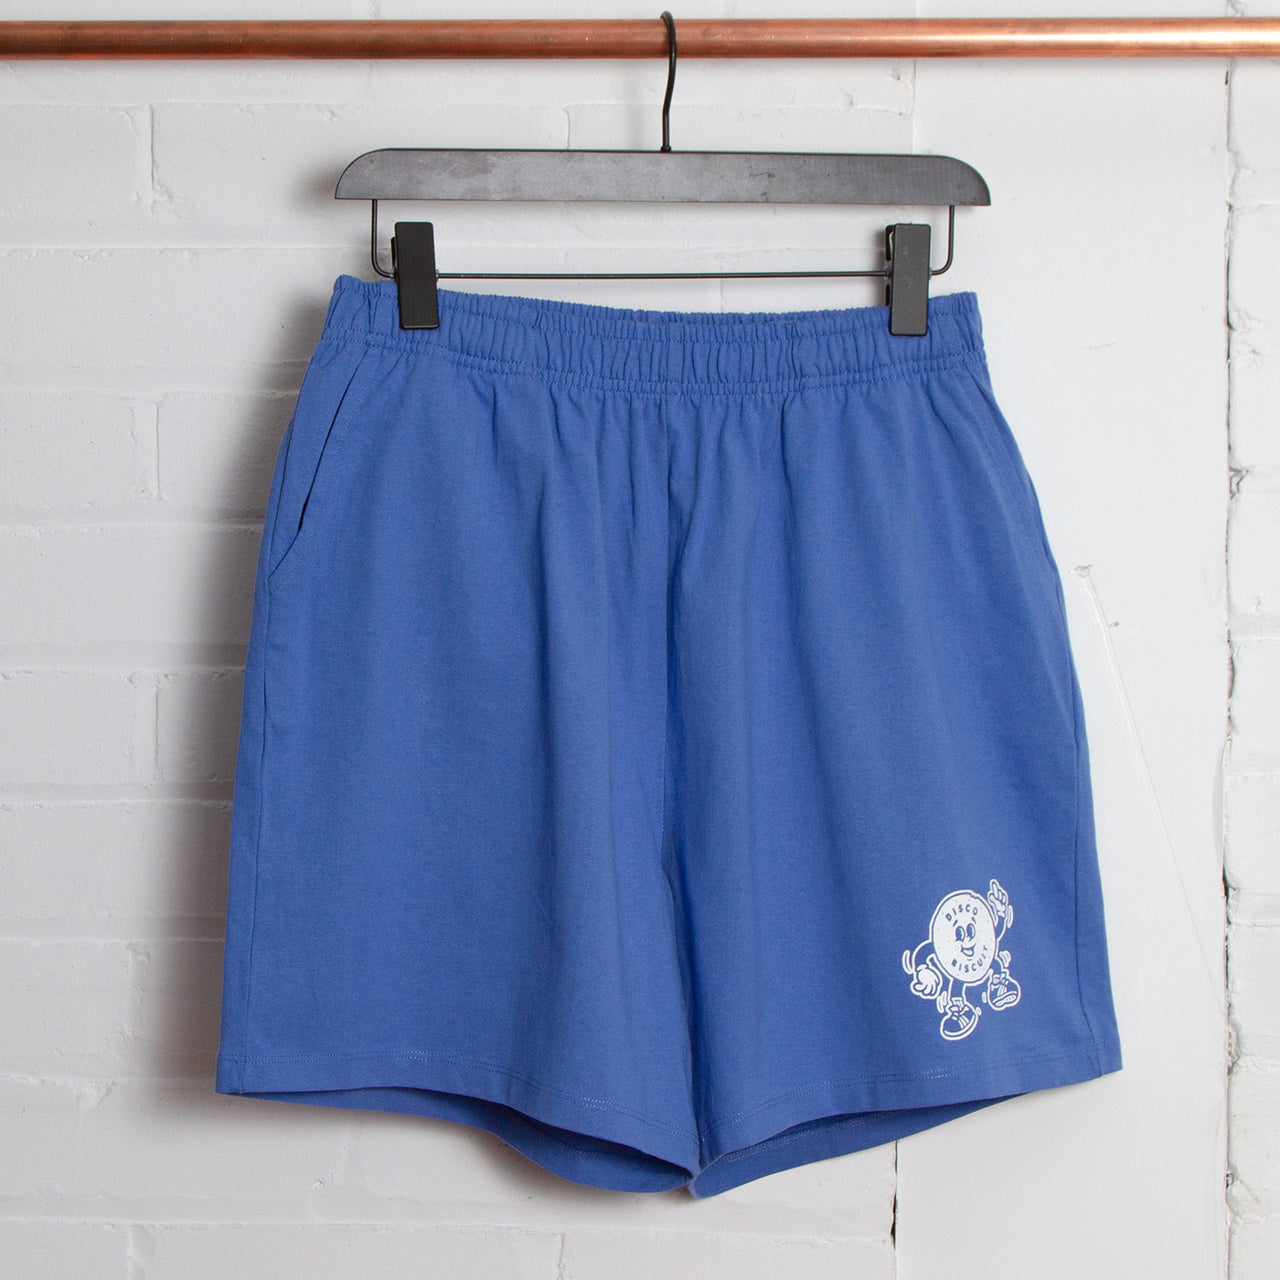 Disco Biscuit - Jersey Shorts - Bright Blue